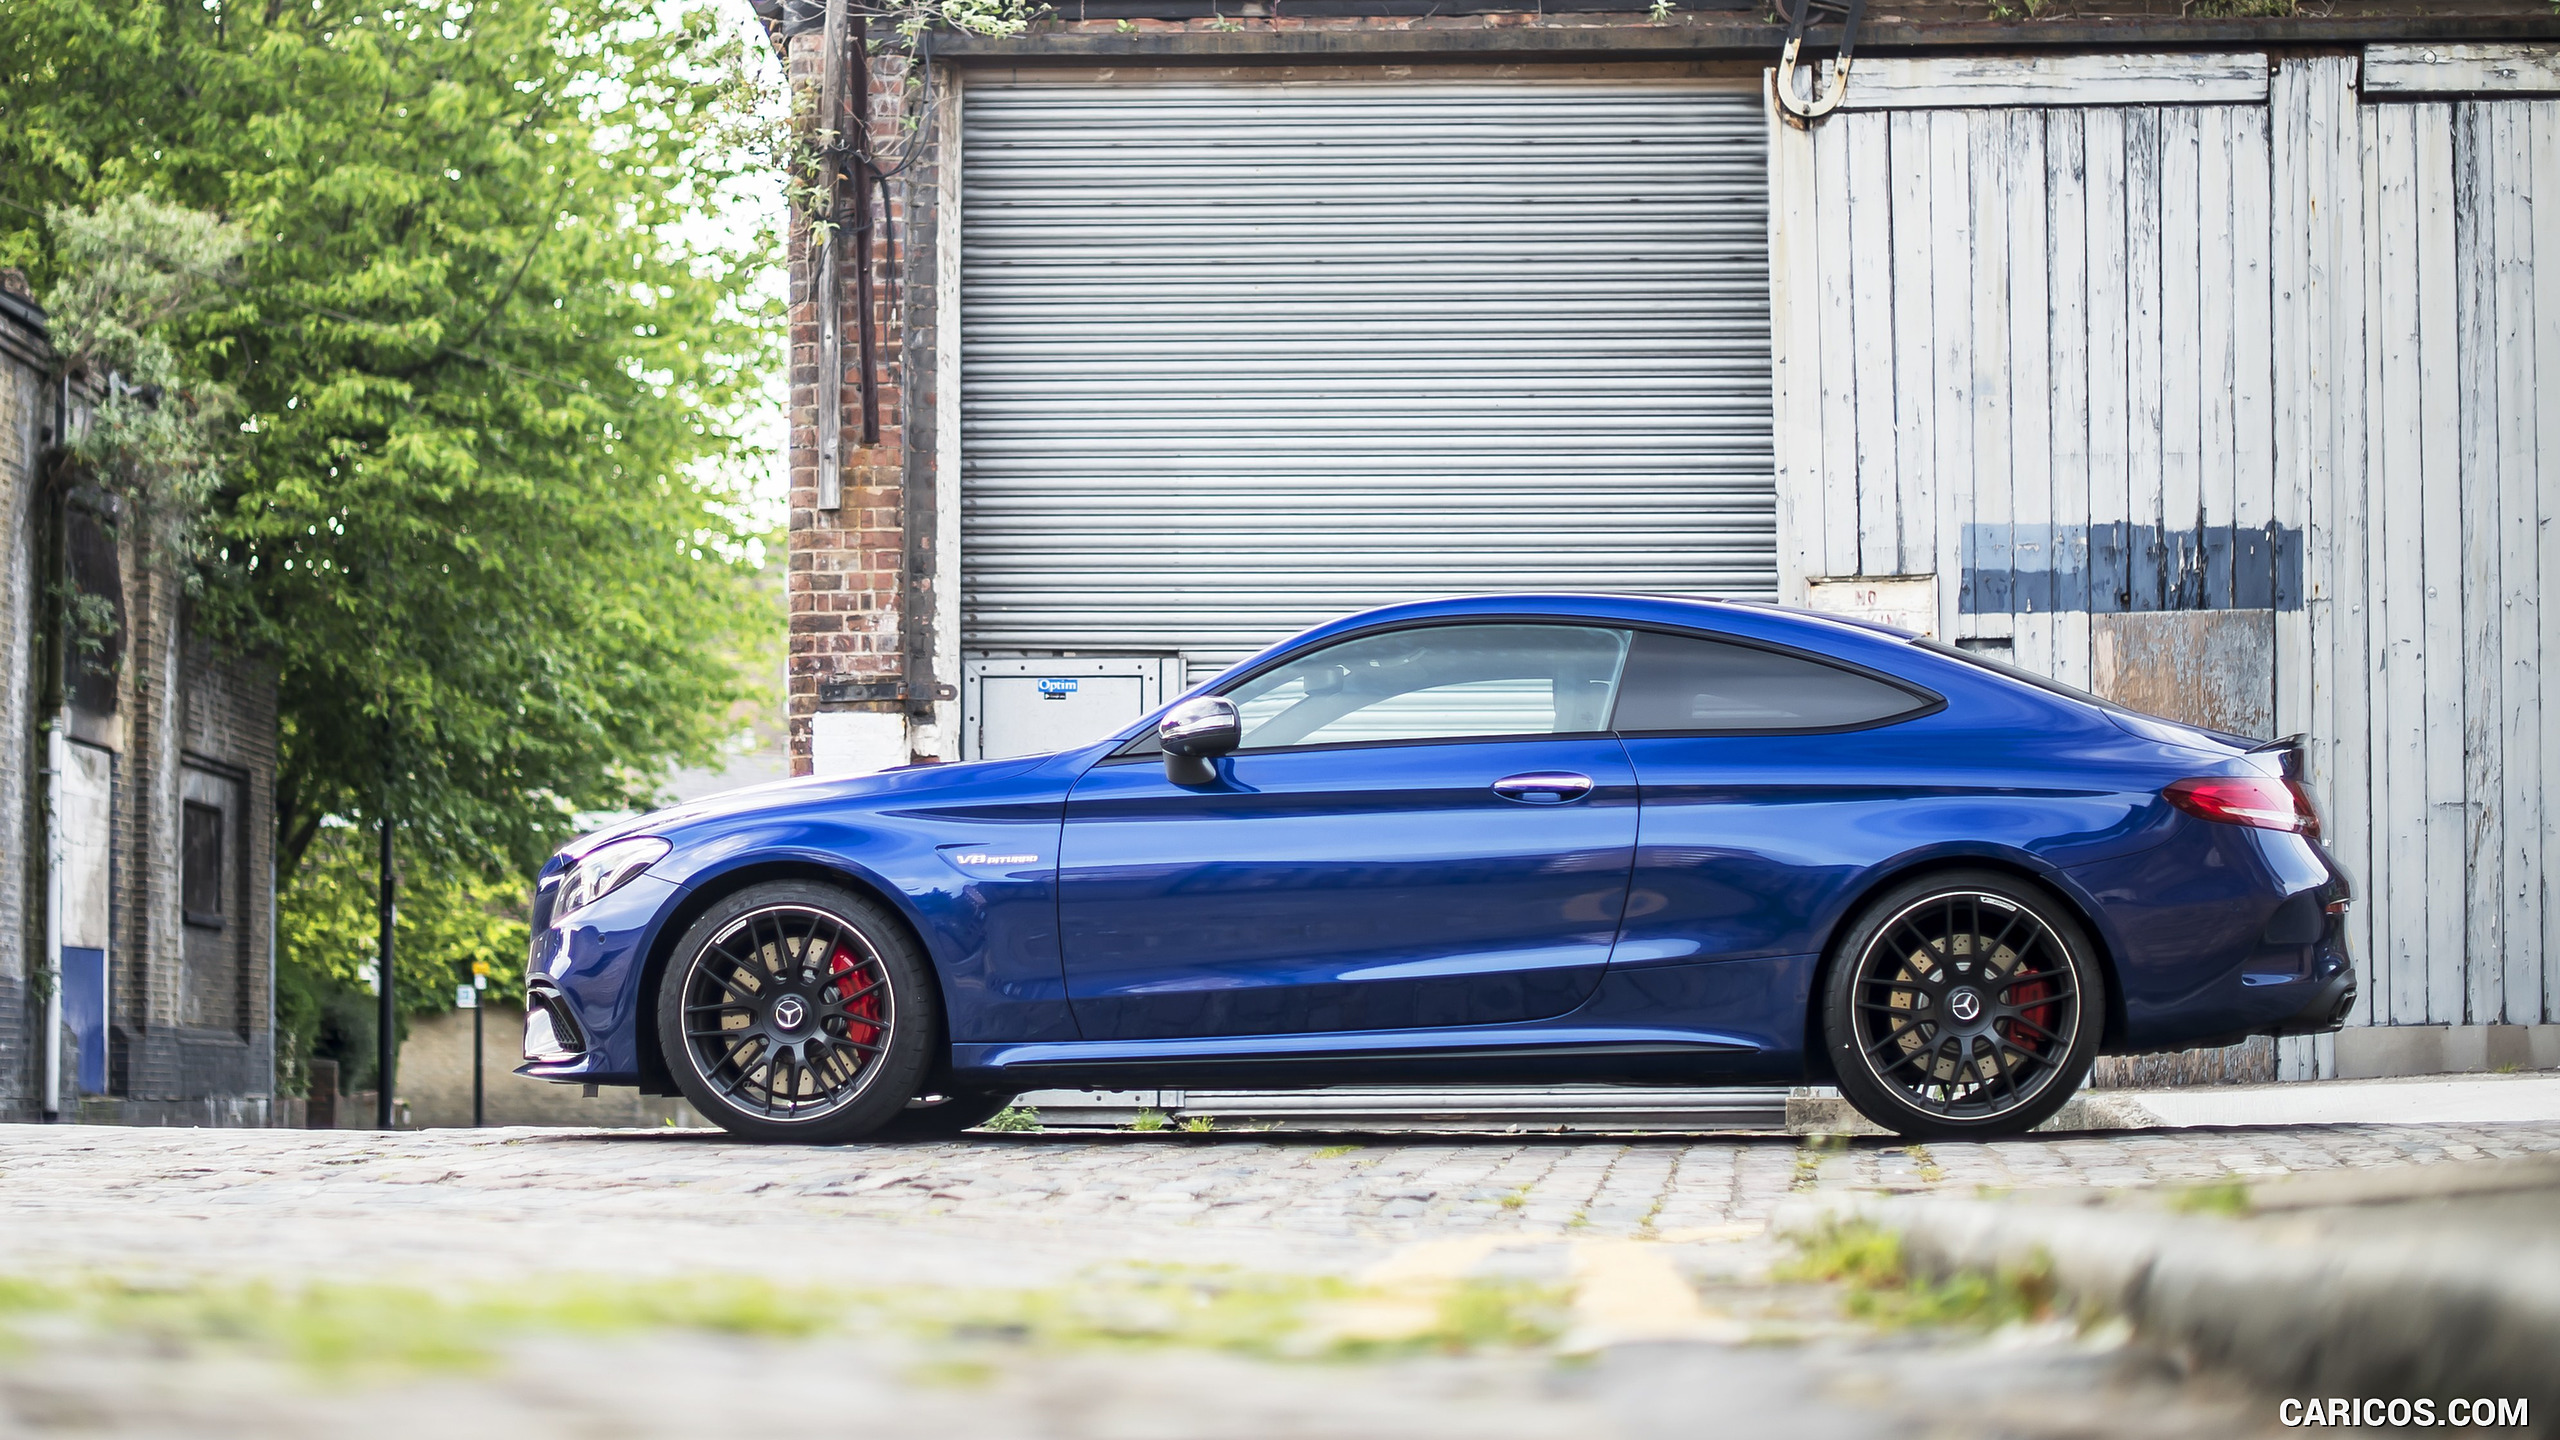 2017 Mercedes-AMG C63 S Coupe (UK-Spec) - Side, #19 of 52